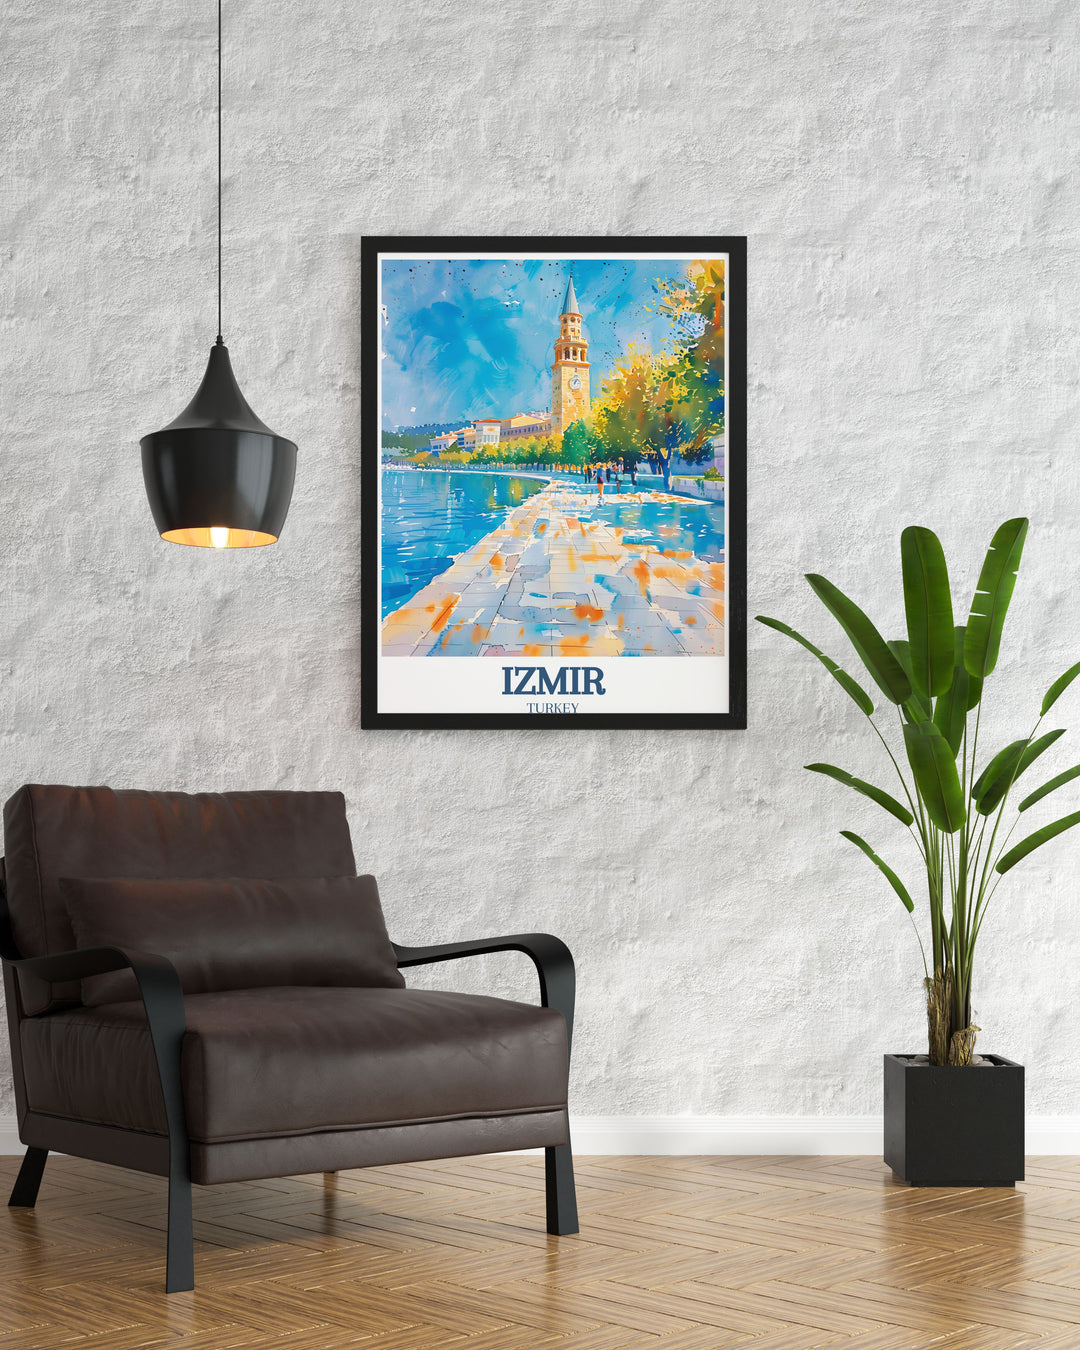 This travel poster beautifully captures Izmirs Clock Tower, Kordon Promenade, and the Aegean Sea, highlighting the vibrant and historical essence of these iconic landmarks in Turkey.